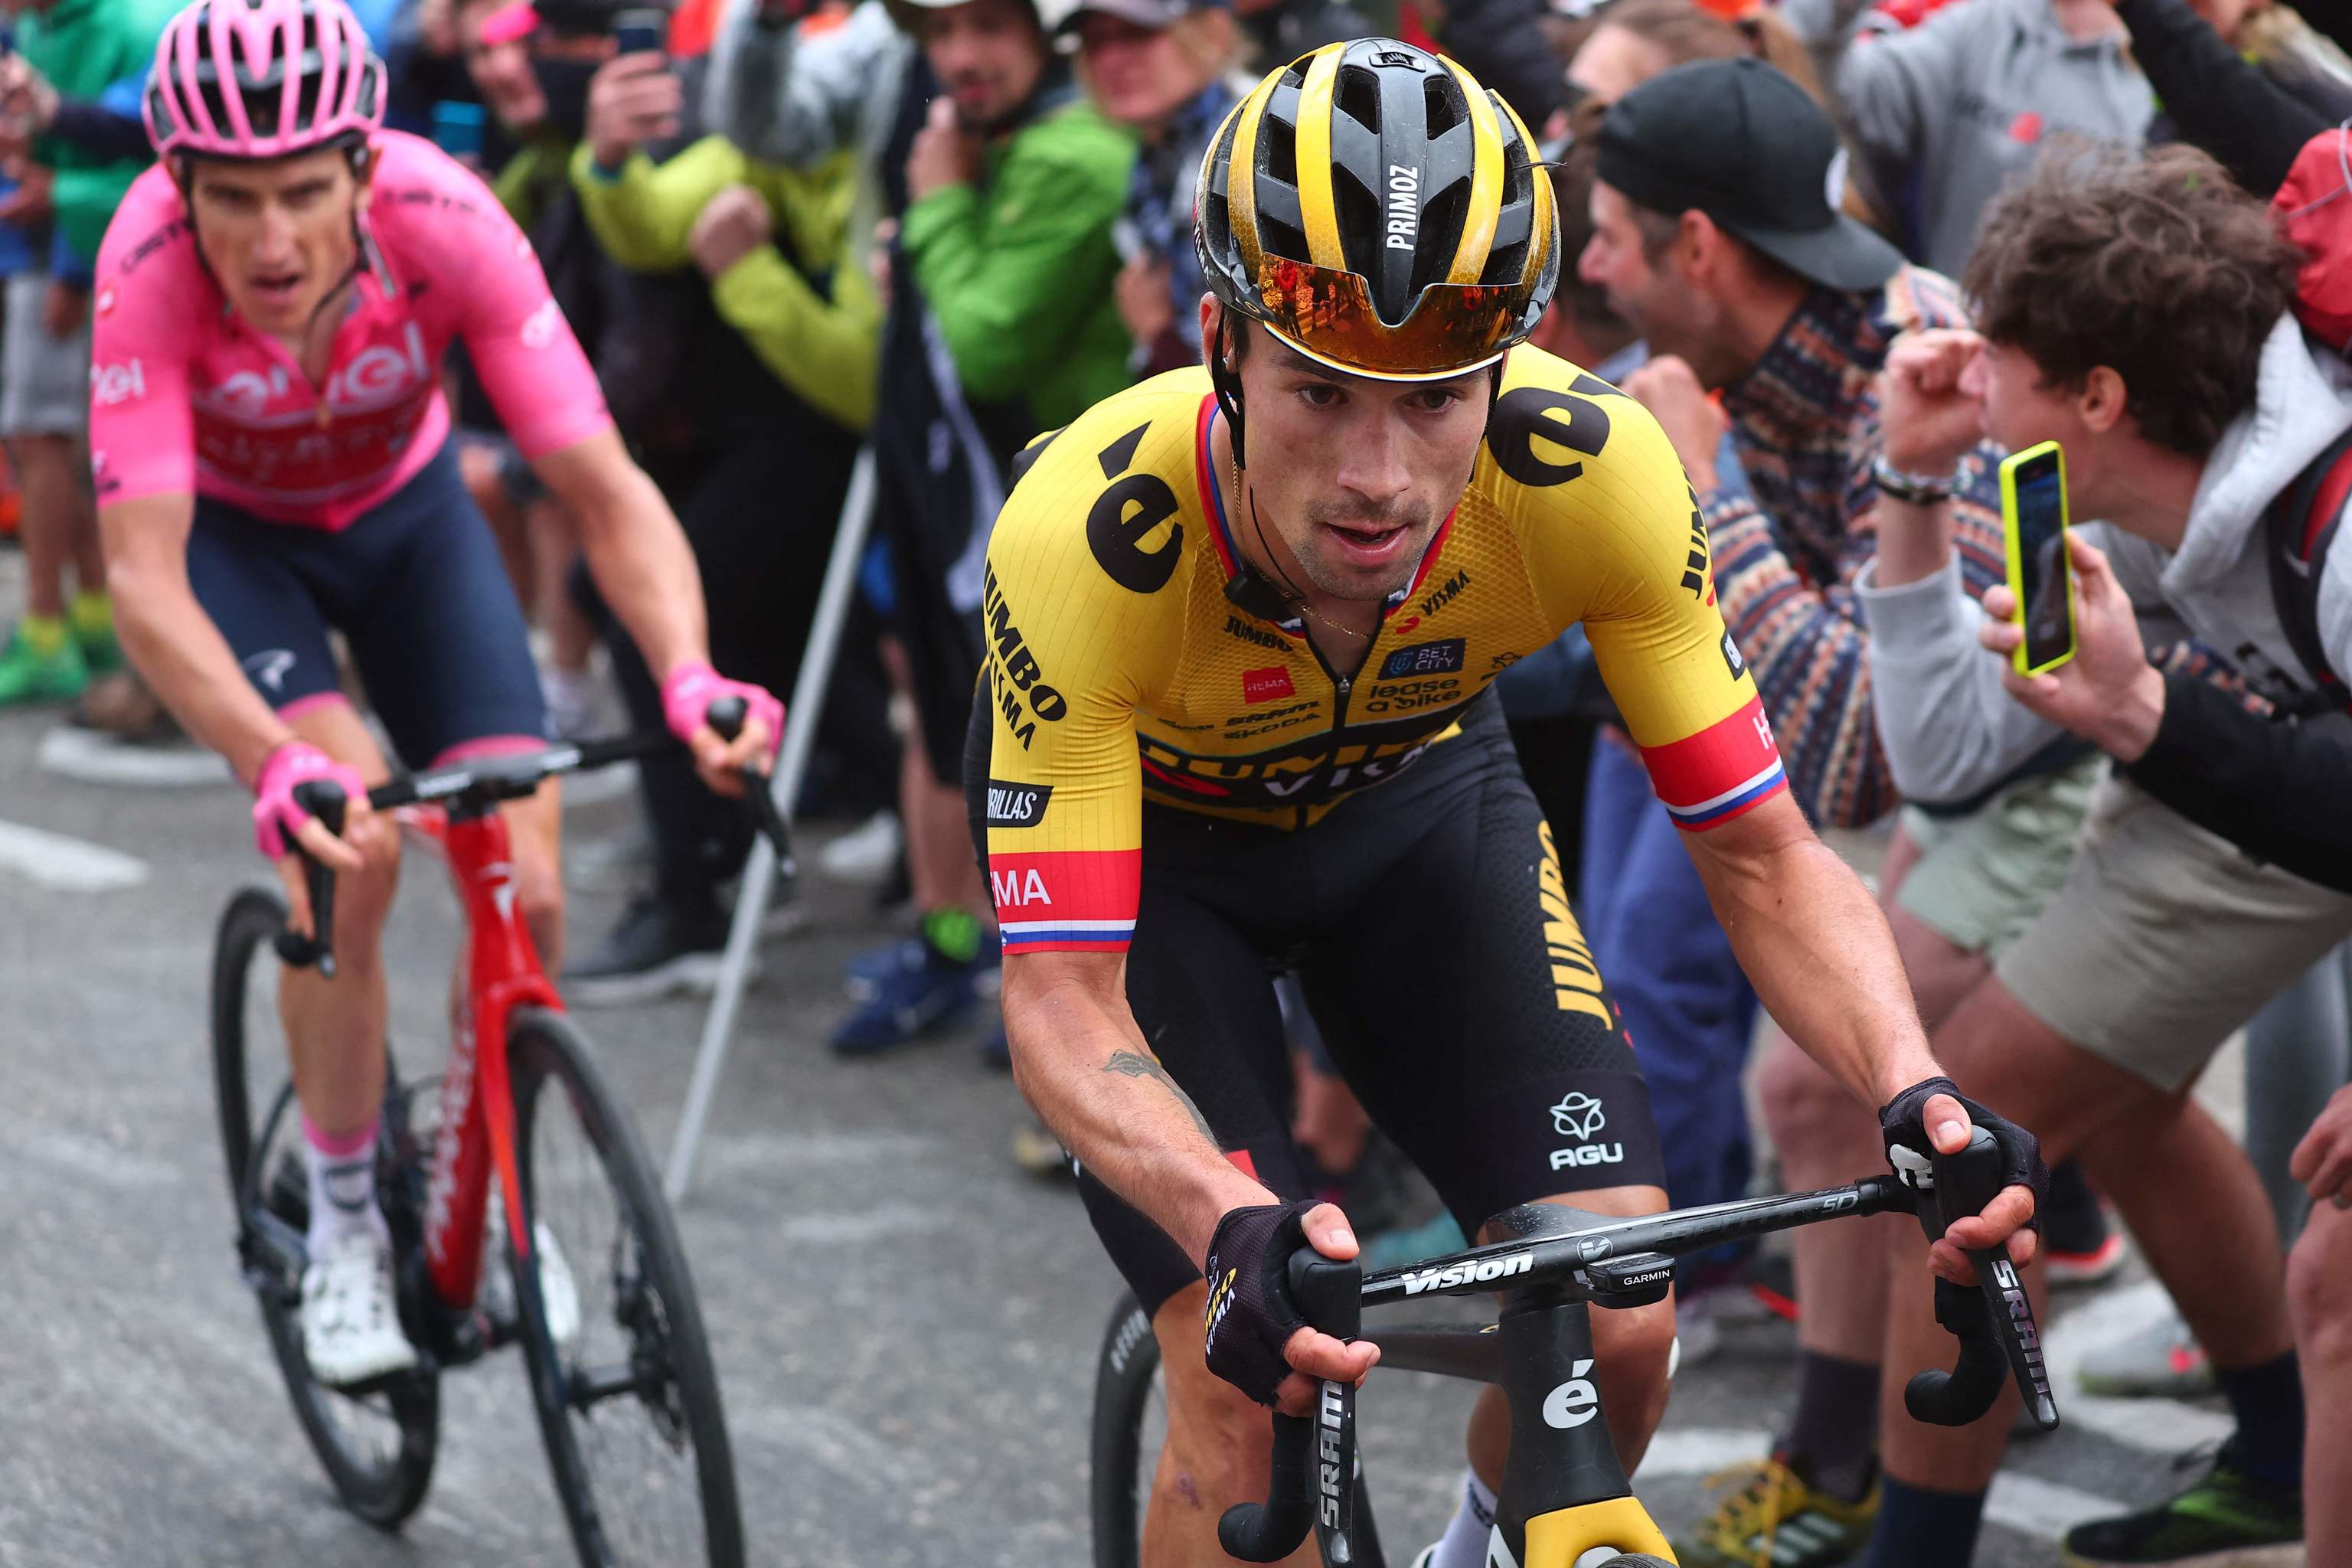 Giro d’Italia: The queen stage of the Giro takes Almeida off the hook and leaves the pink jersey for the Thomas-Roglic duel